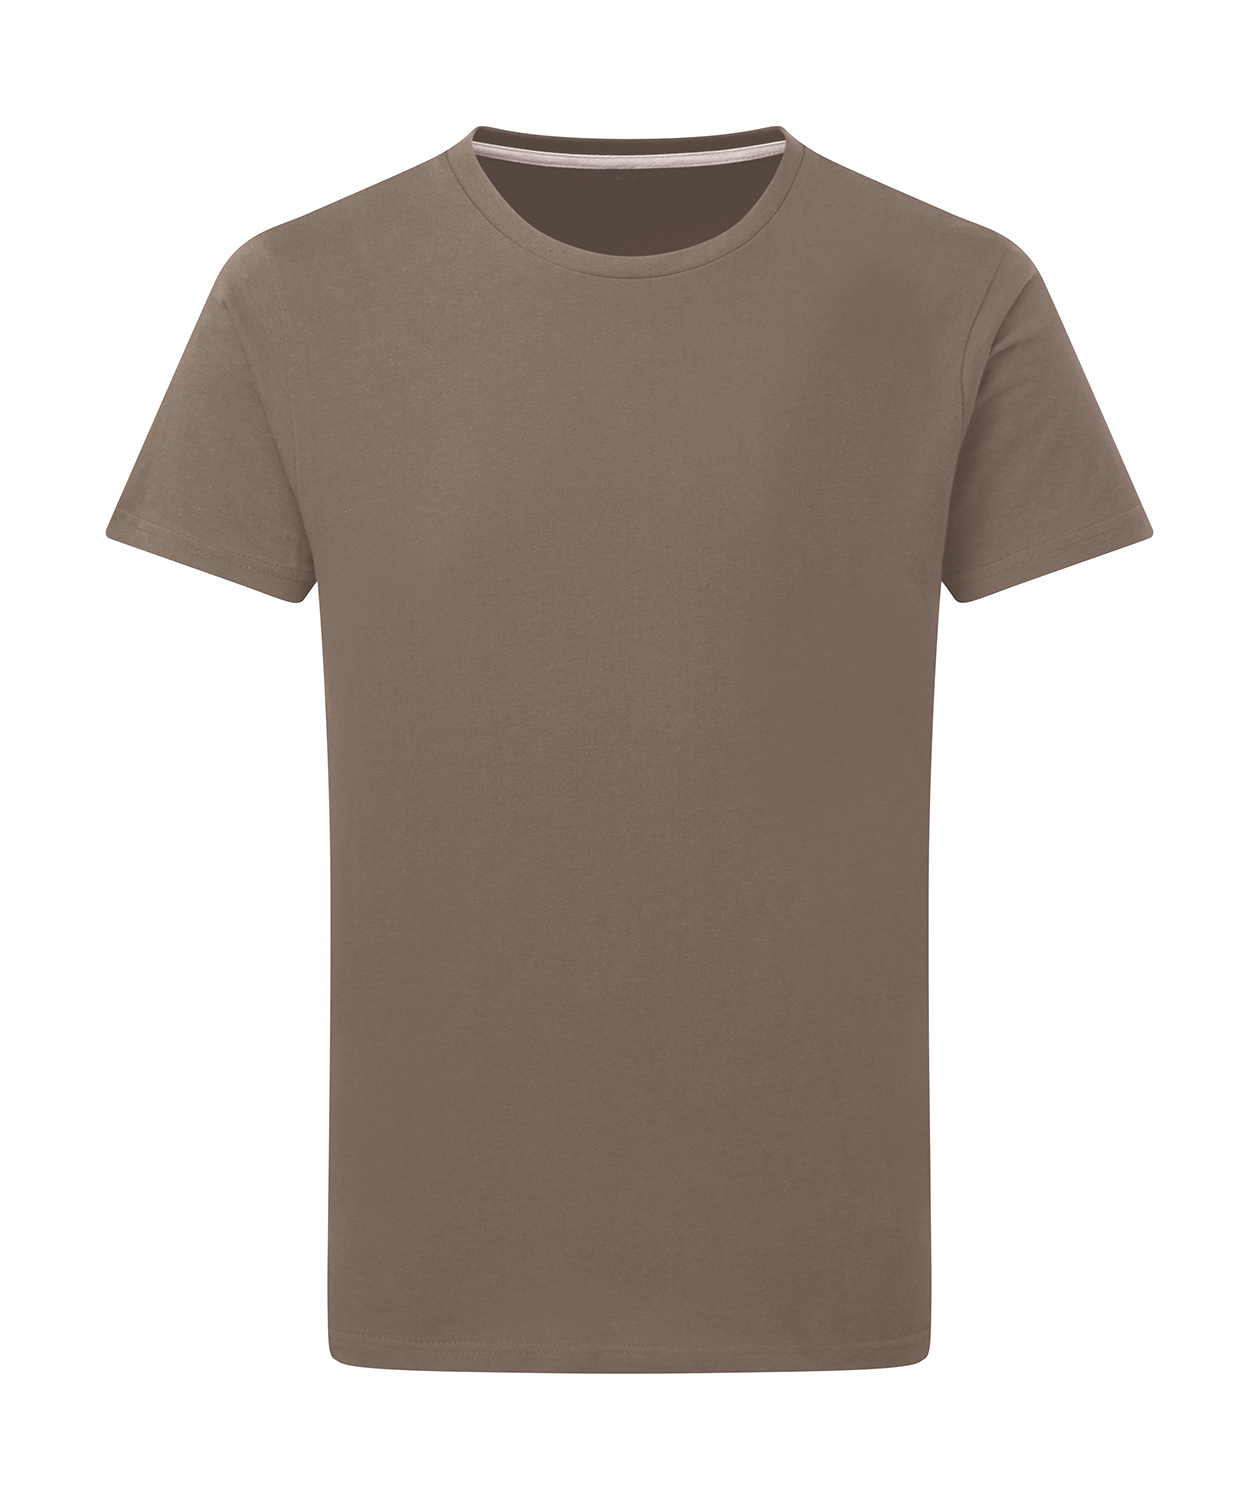 Le vrai luxe Deep Taupe